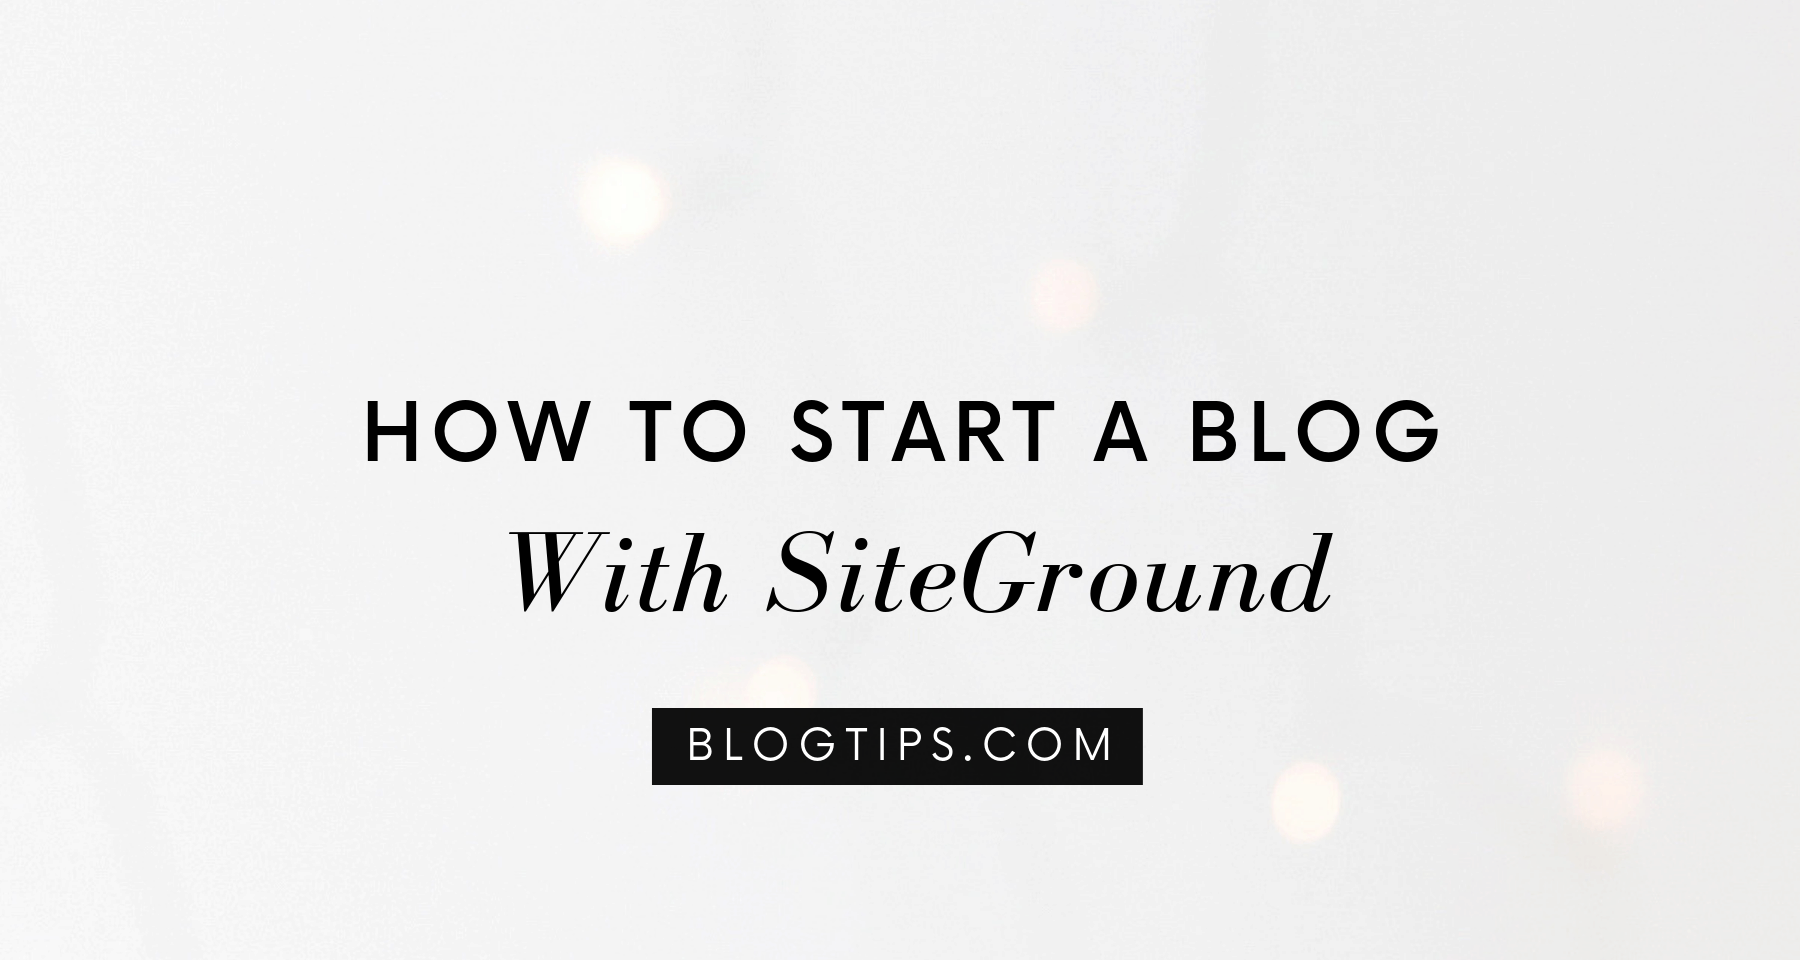 How to start a blog a blog with Siteground step by step BlogTips.com